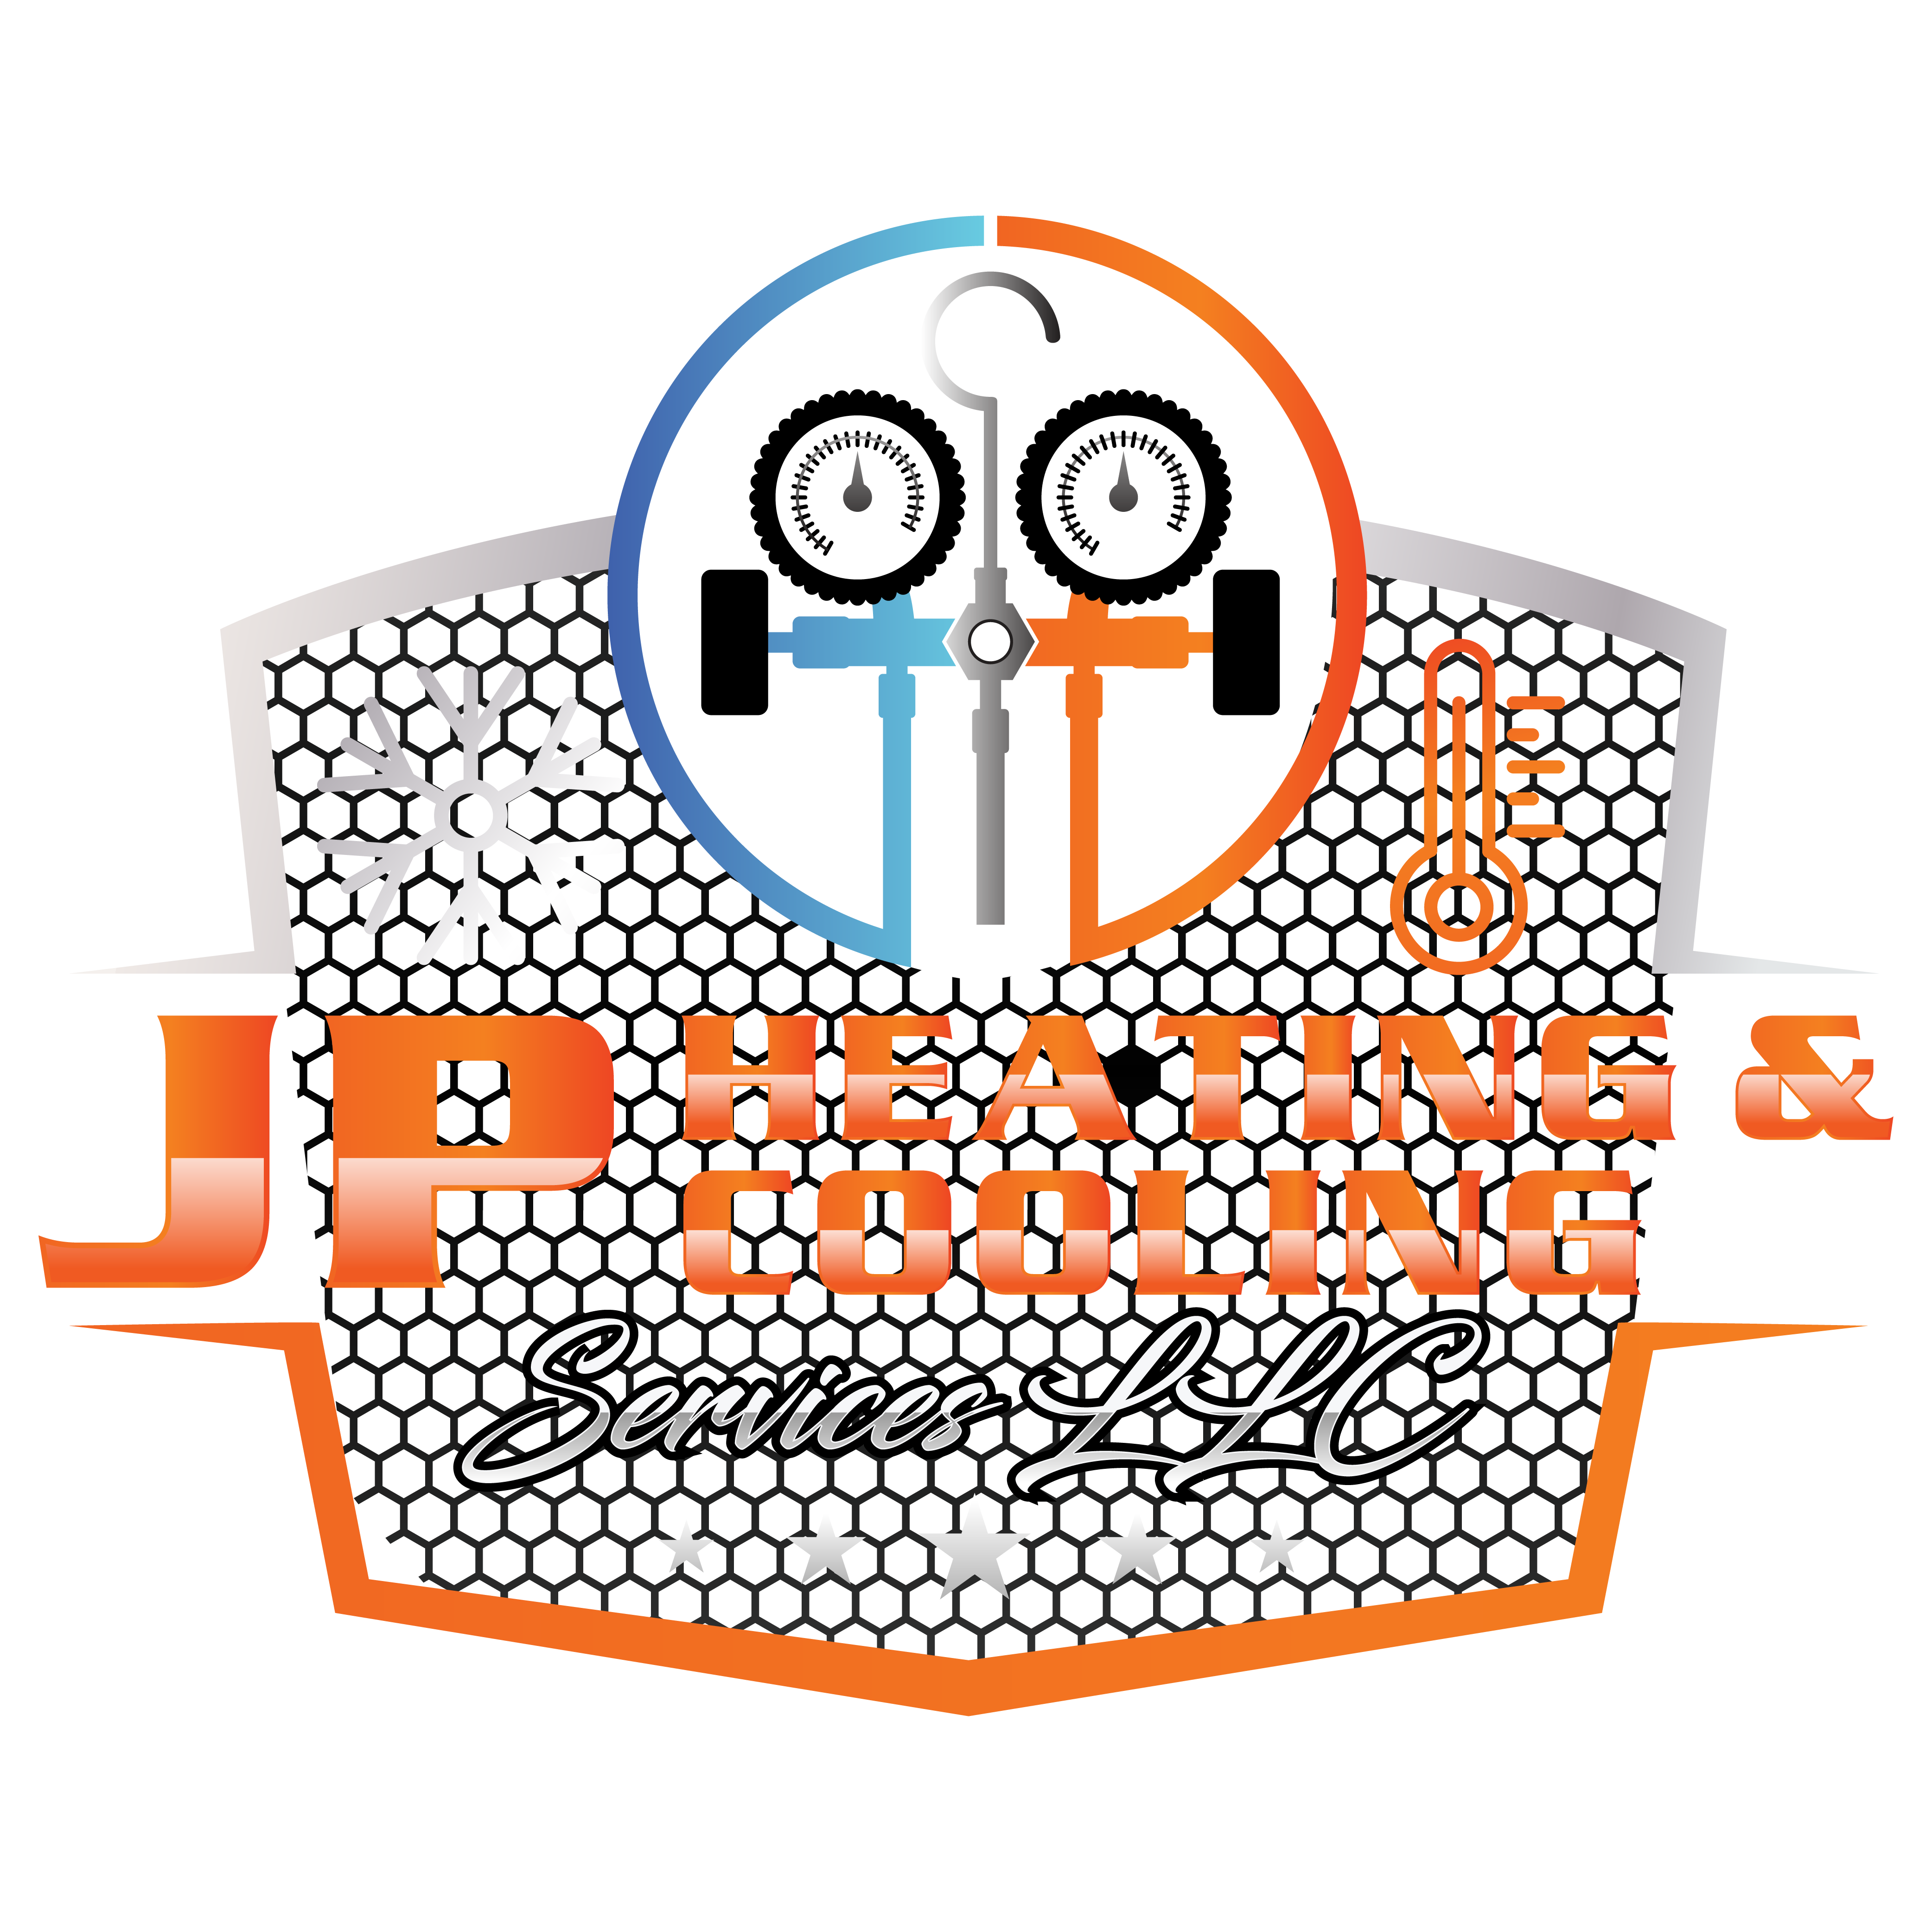 J.P Heating And Cooling Services LLC - Cedarhurst, NY 11516 - (516)243-3848 | ShowMeLocal.com